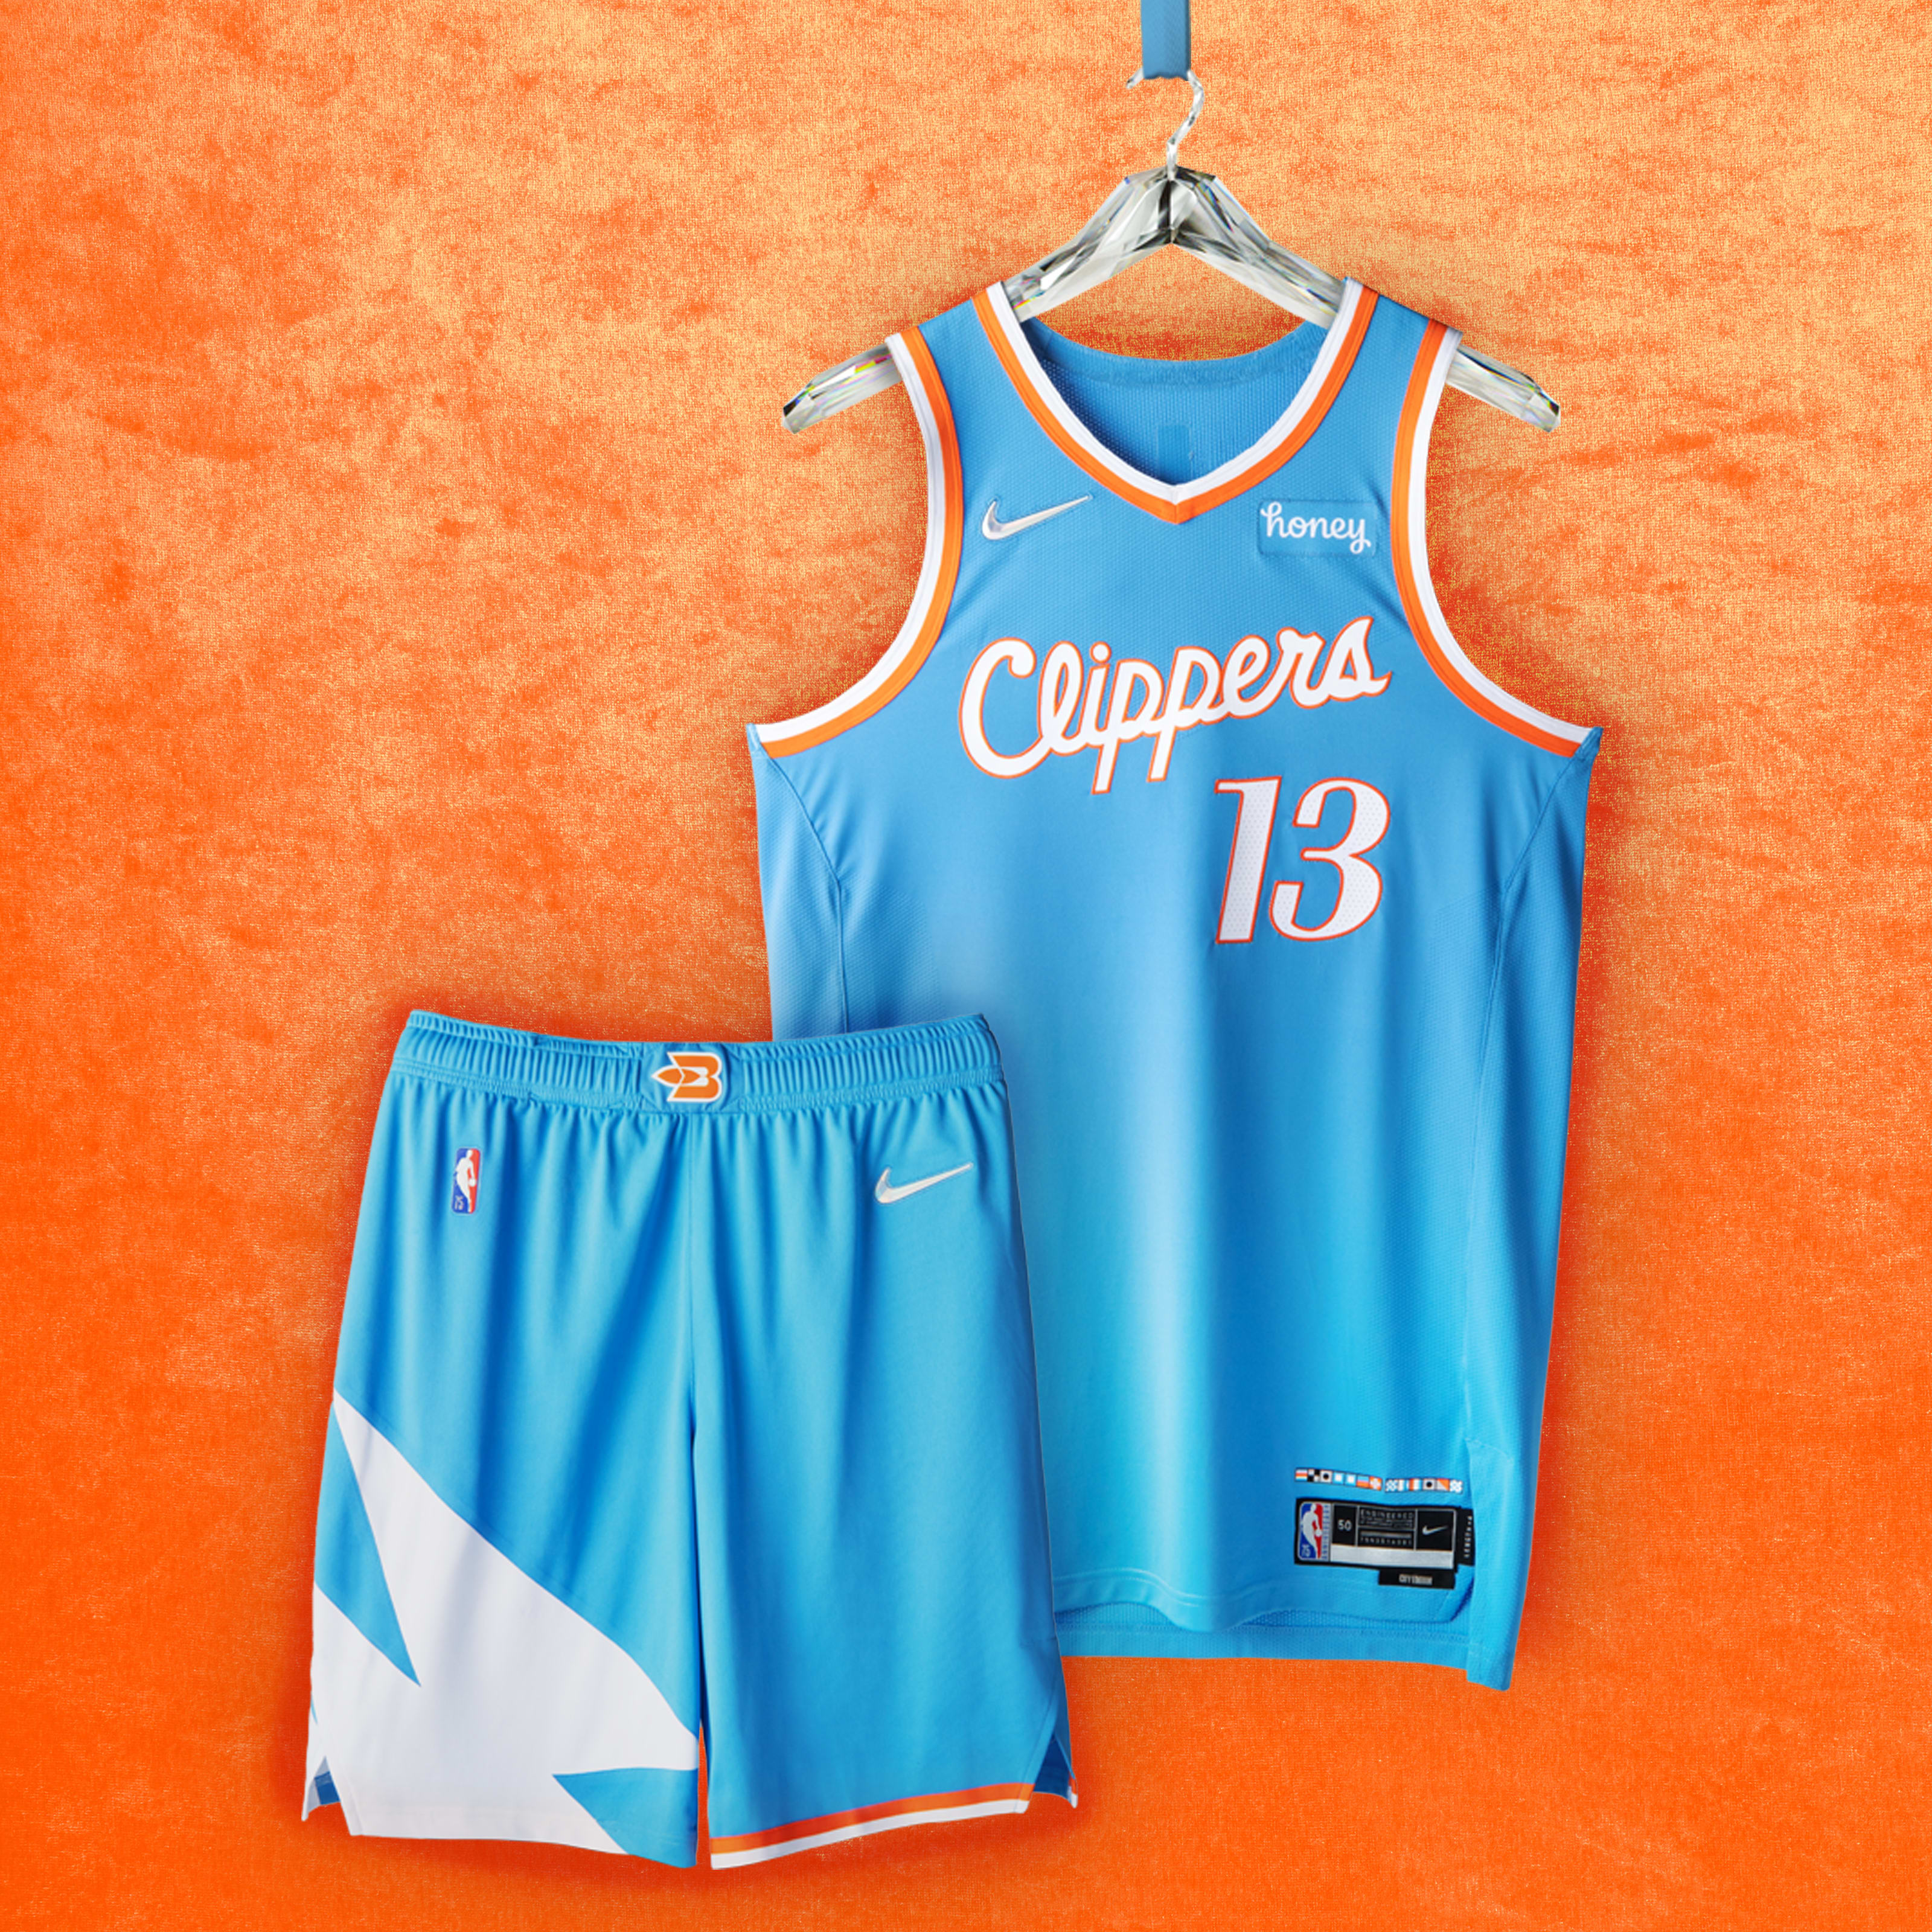 LA Clippers use Nike opportunity to fix their uniforms